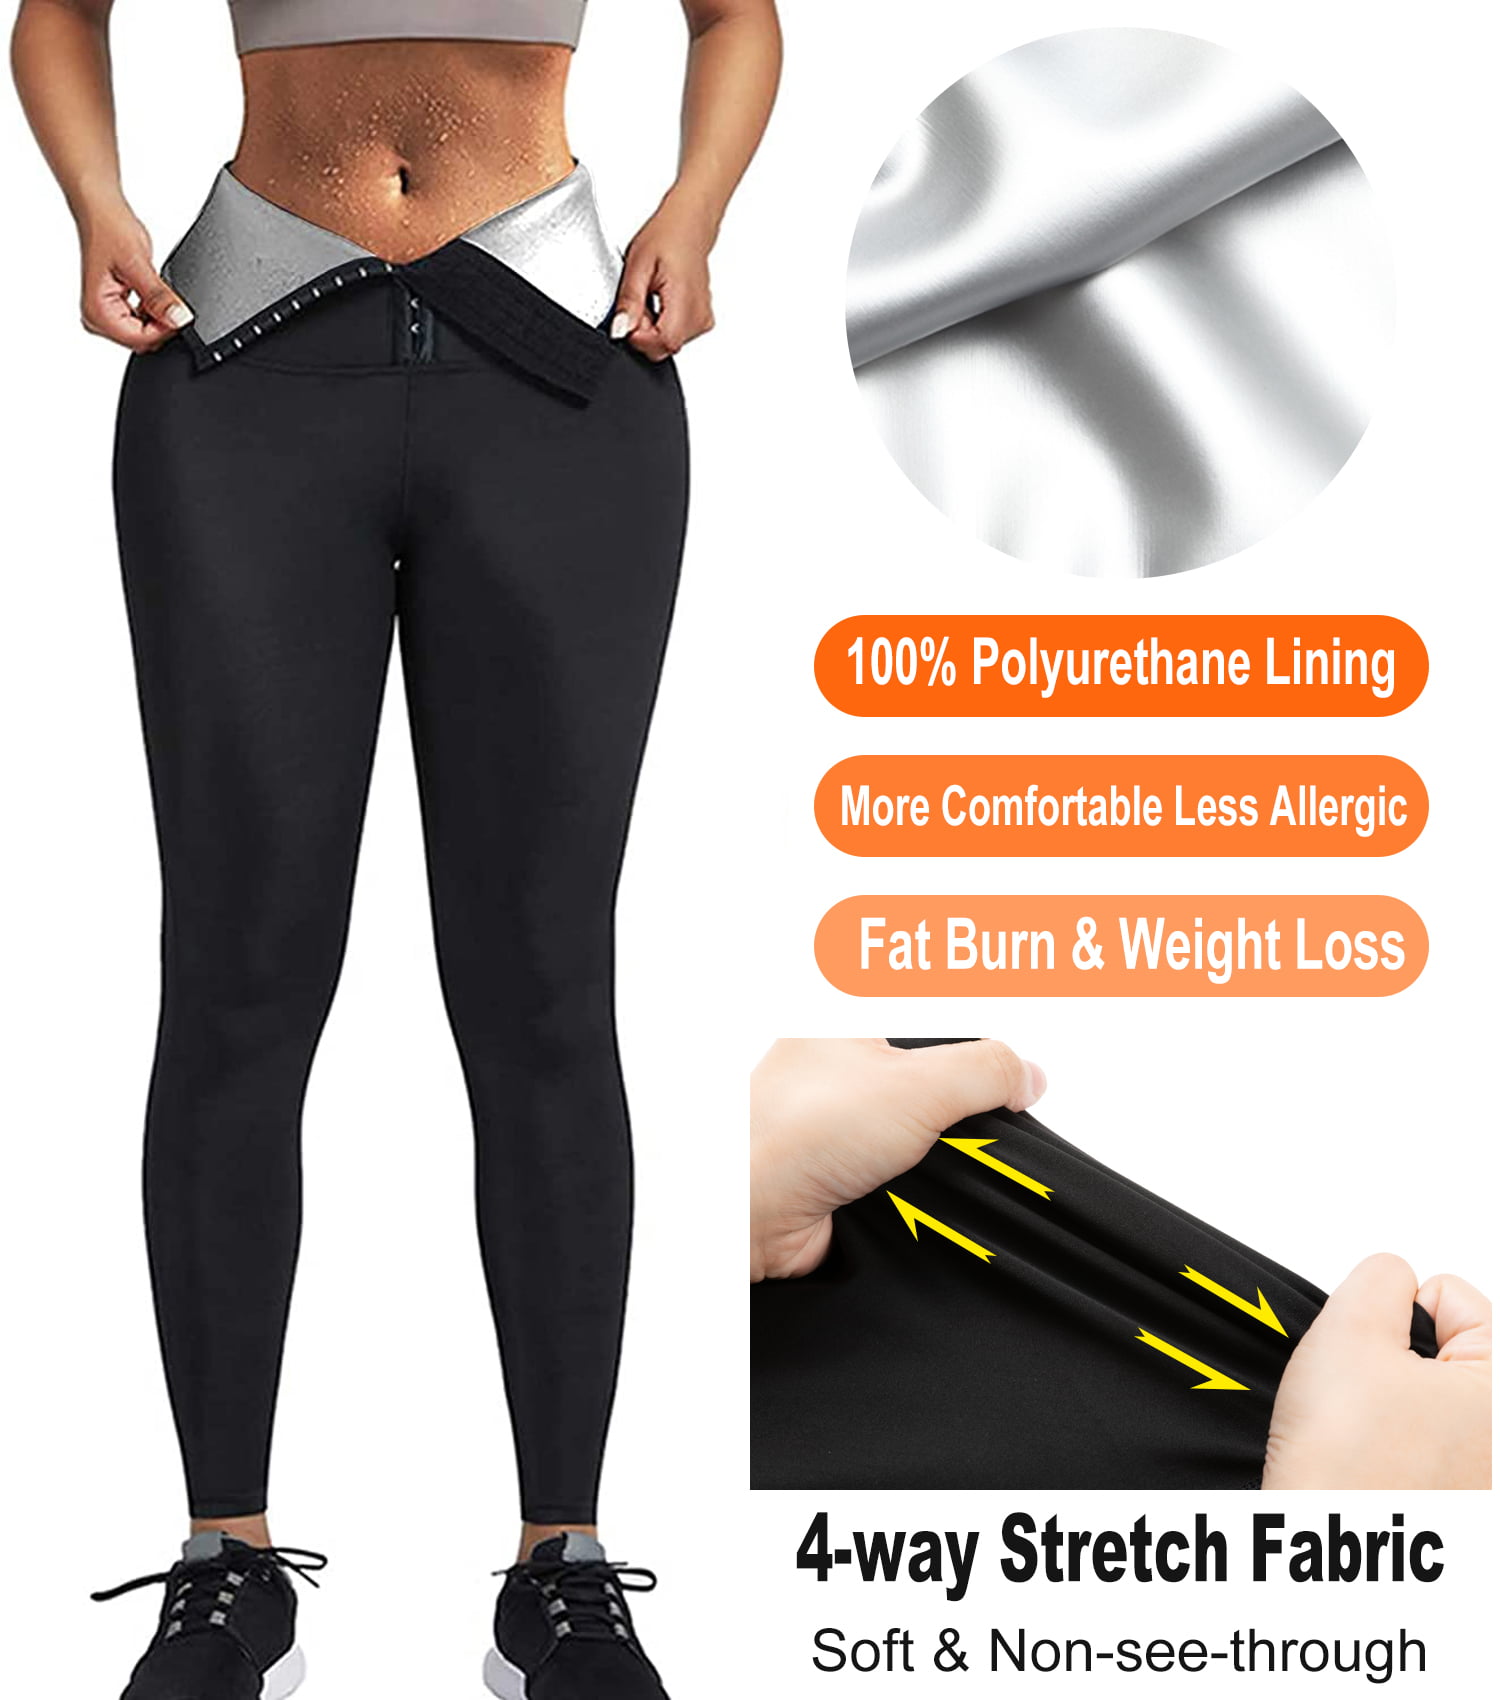 Winter Womens High Waist Thermal Thermal Leggings Women With Tummy Control  Black Slim Fit Body Shaper For Fitness And Skiing Style 231031 From Niao03,  $11.14